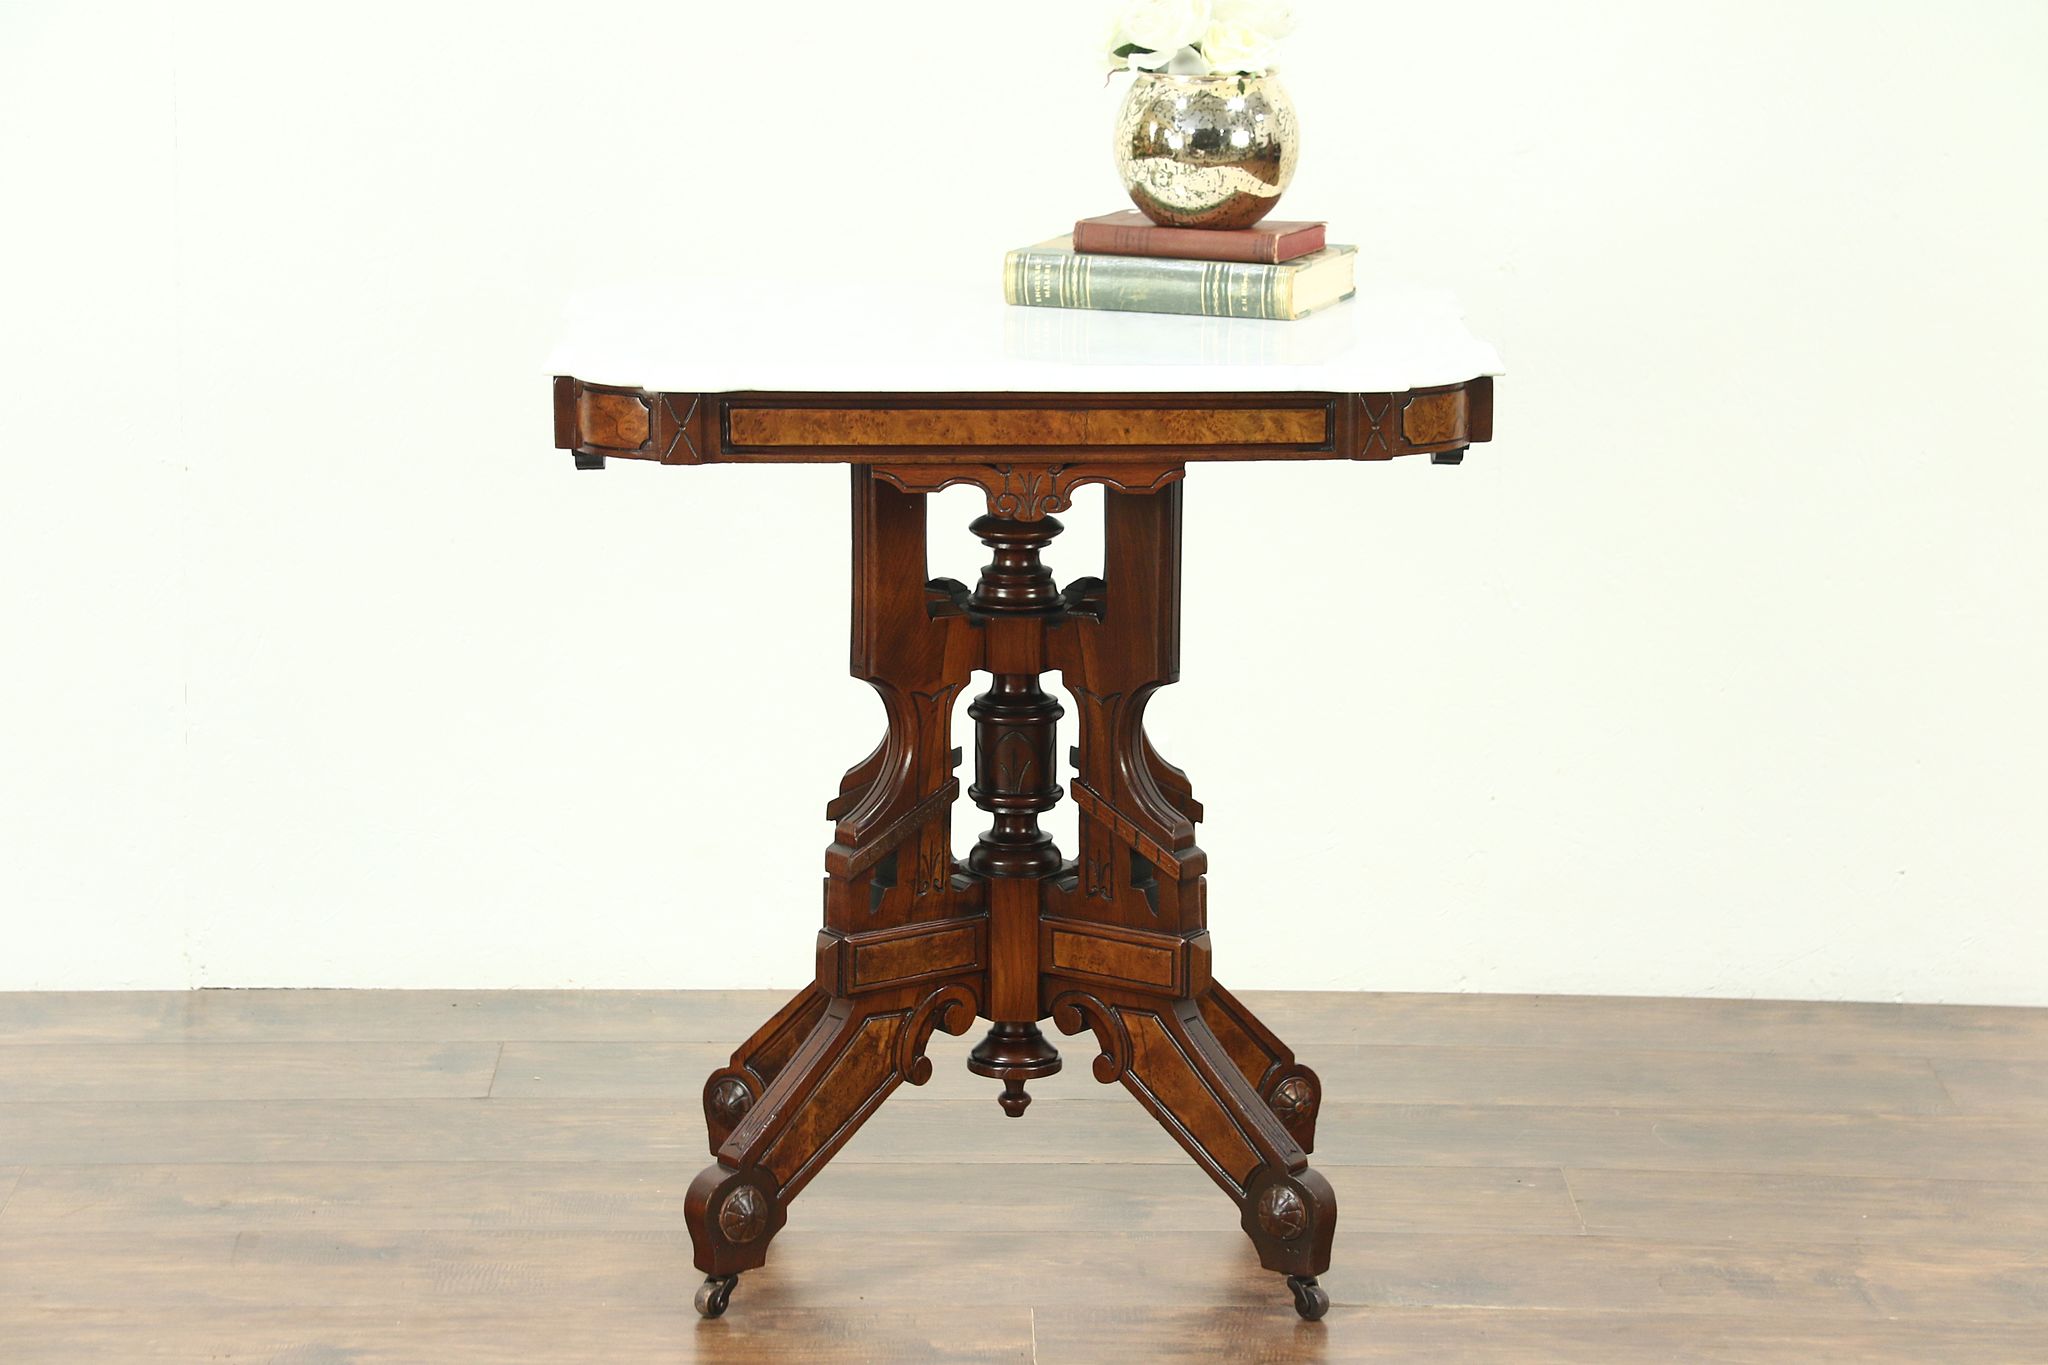 Details about   Antique Marble Top Rolling Carved Wood Parlor Table Victorian Eastlake Style 